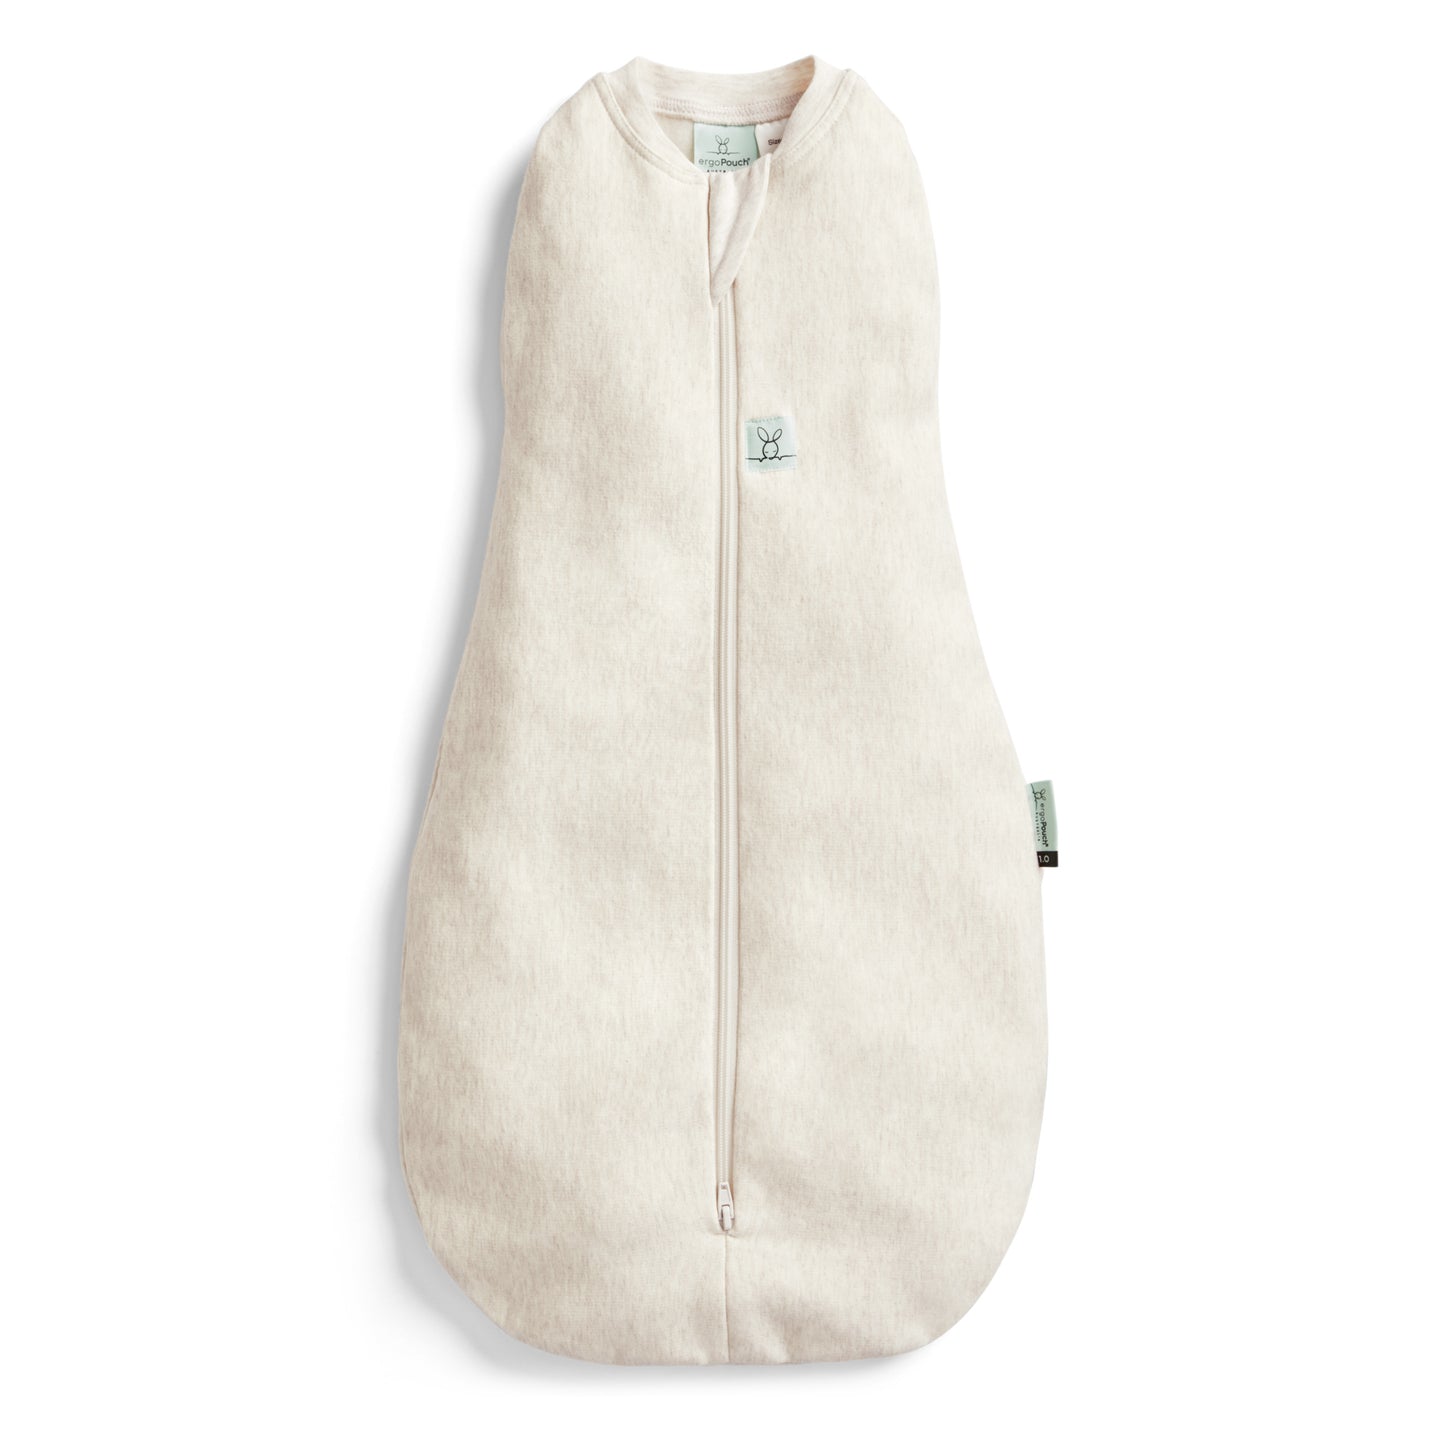 Cocoon Swaddle Bag 1.0 Tog, Oatmeal Marle- 6-12 months